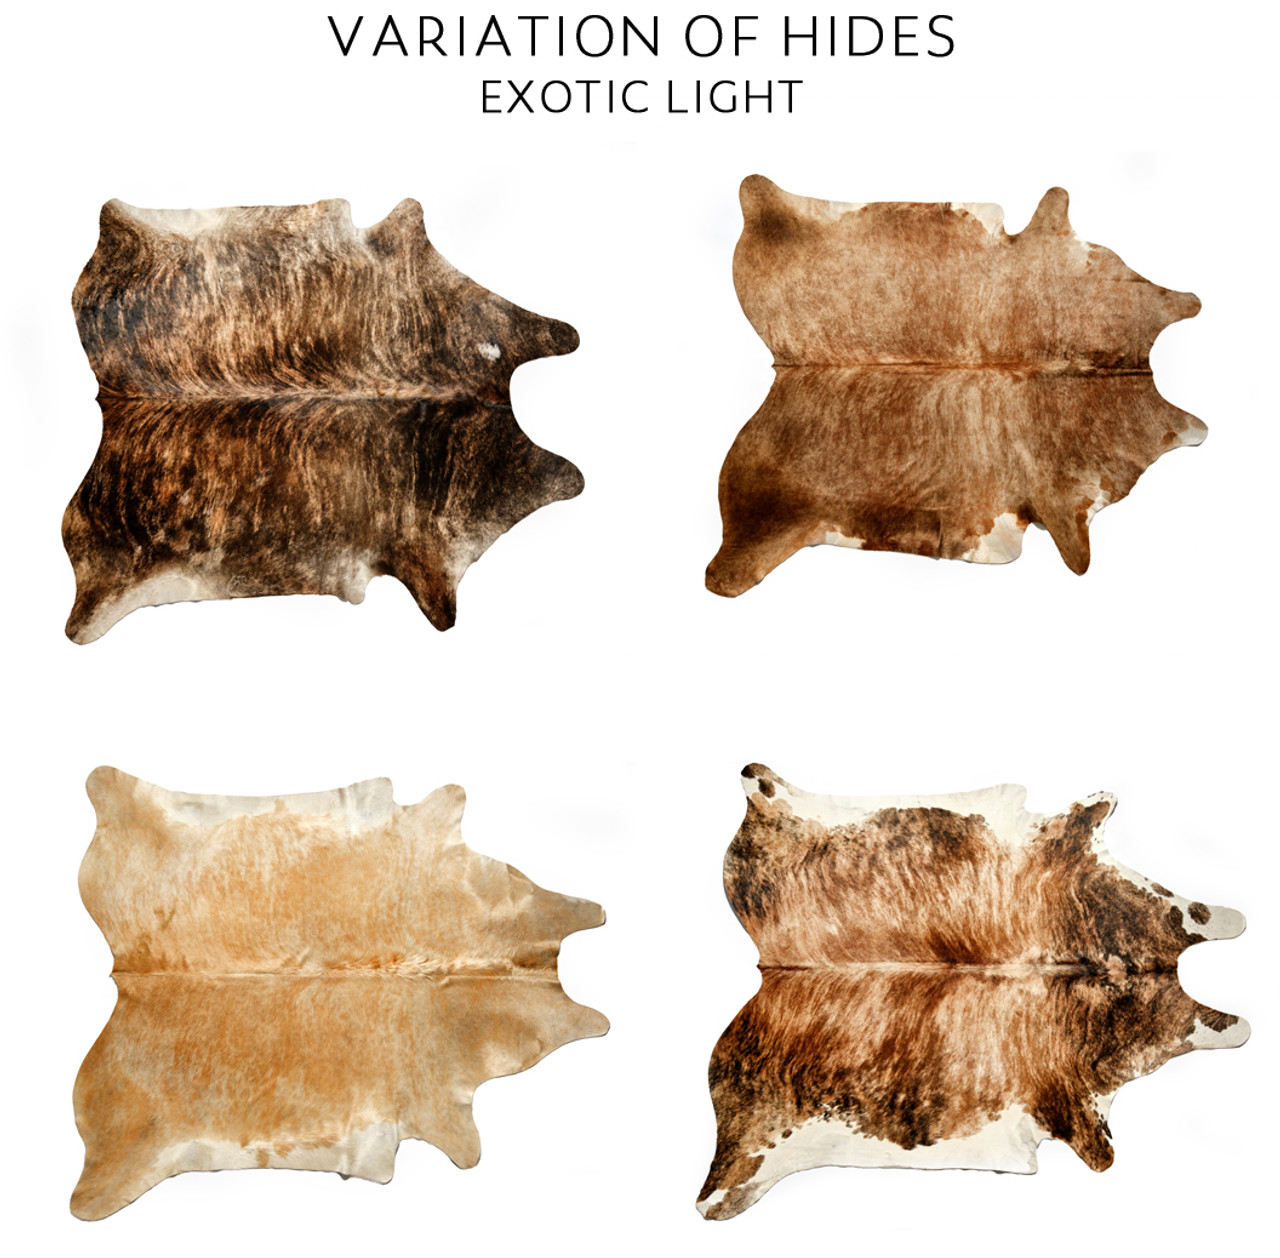 Hair On Hide Leather, Cowhide, Exotic Light 